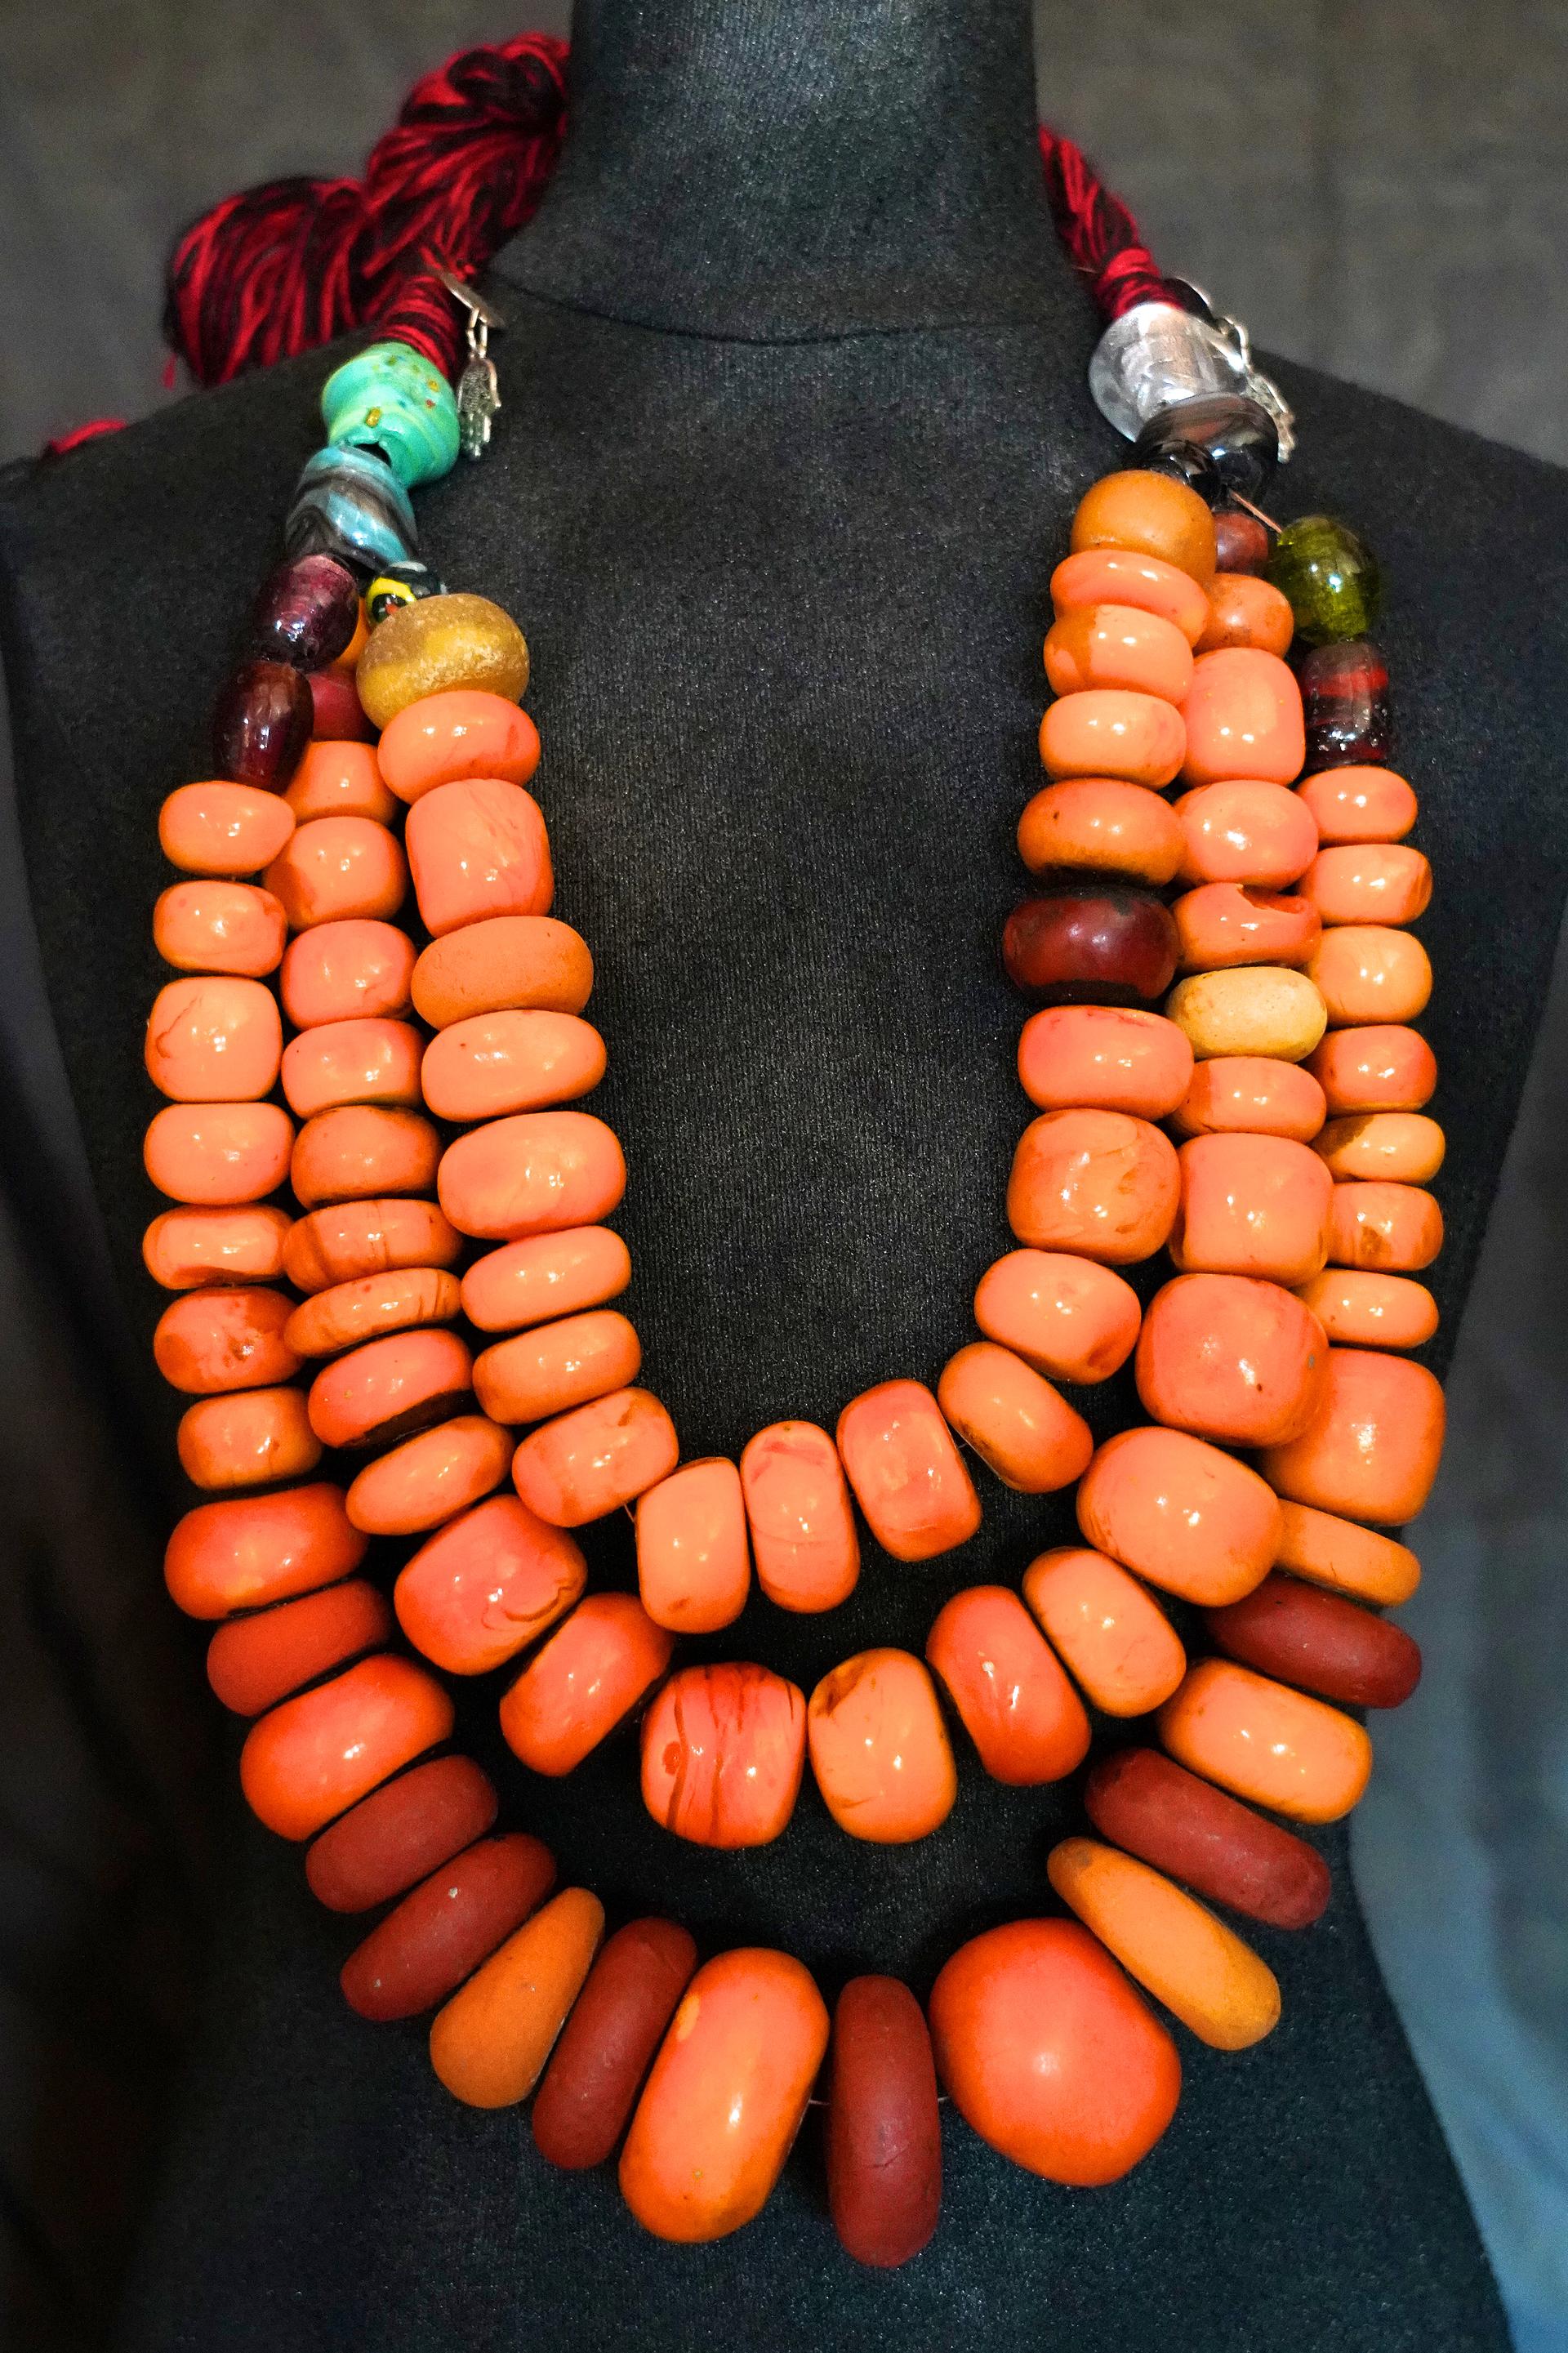 TBW-204-DK 50 African Copal Amber Beads.15mm  Resin Faux Amber Beads